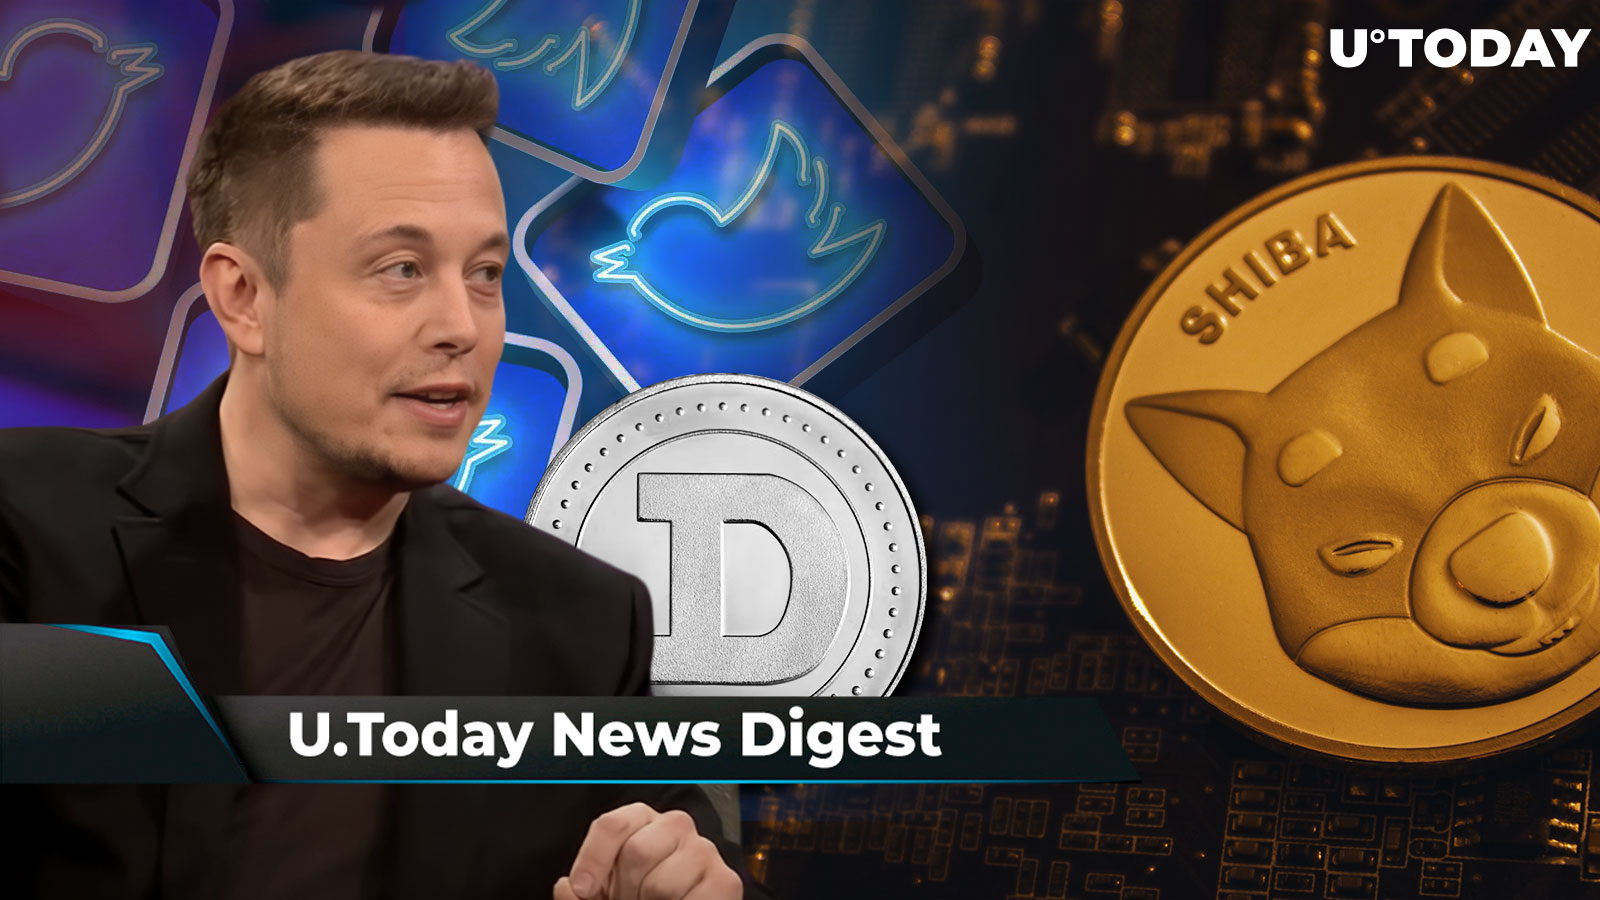 Elon Musk May Talk to DOGE Army via Twitter Spaces, XRP Accepted as Payment for Luxury Homes in Dubai, 72.46 Billion SHIB Dumped: Crypto News Digest by U.Today